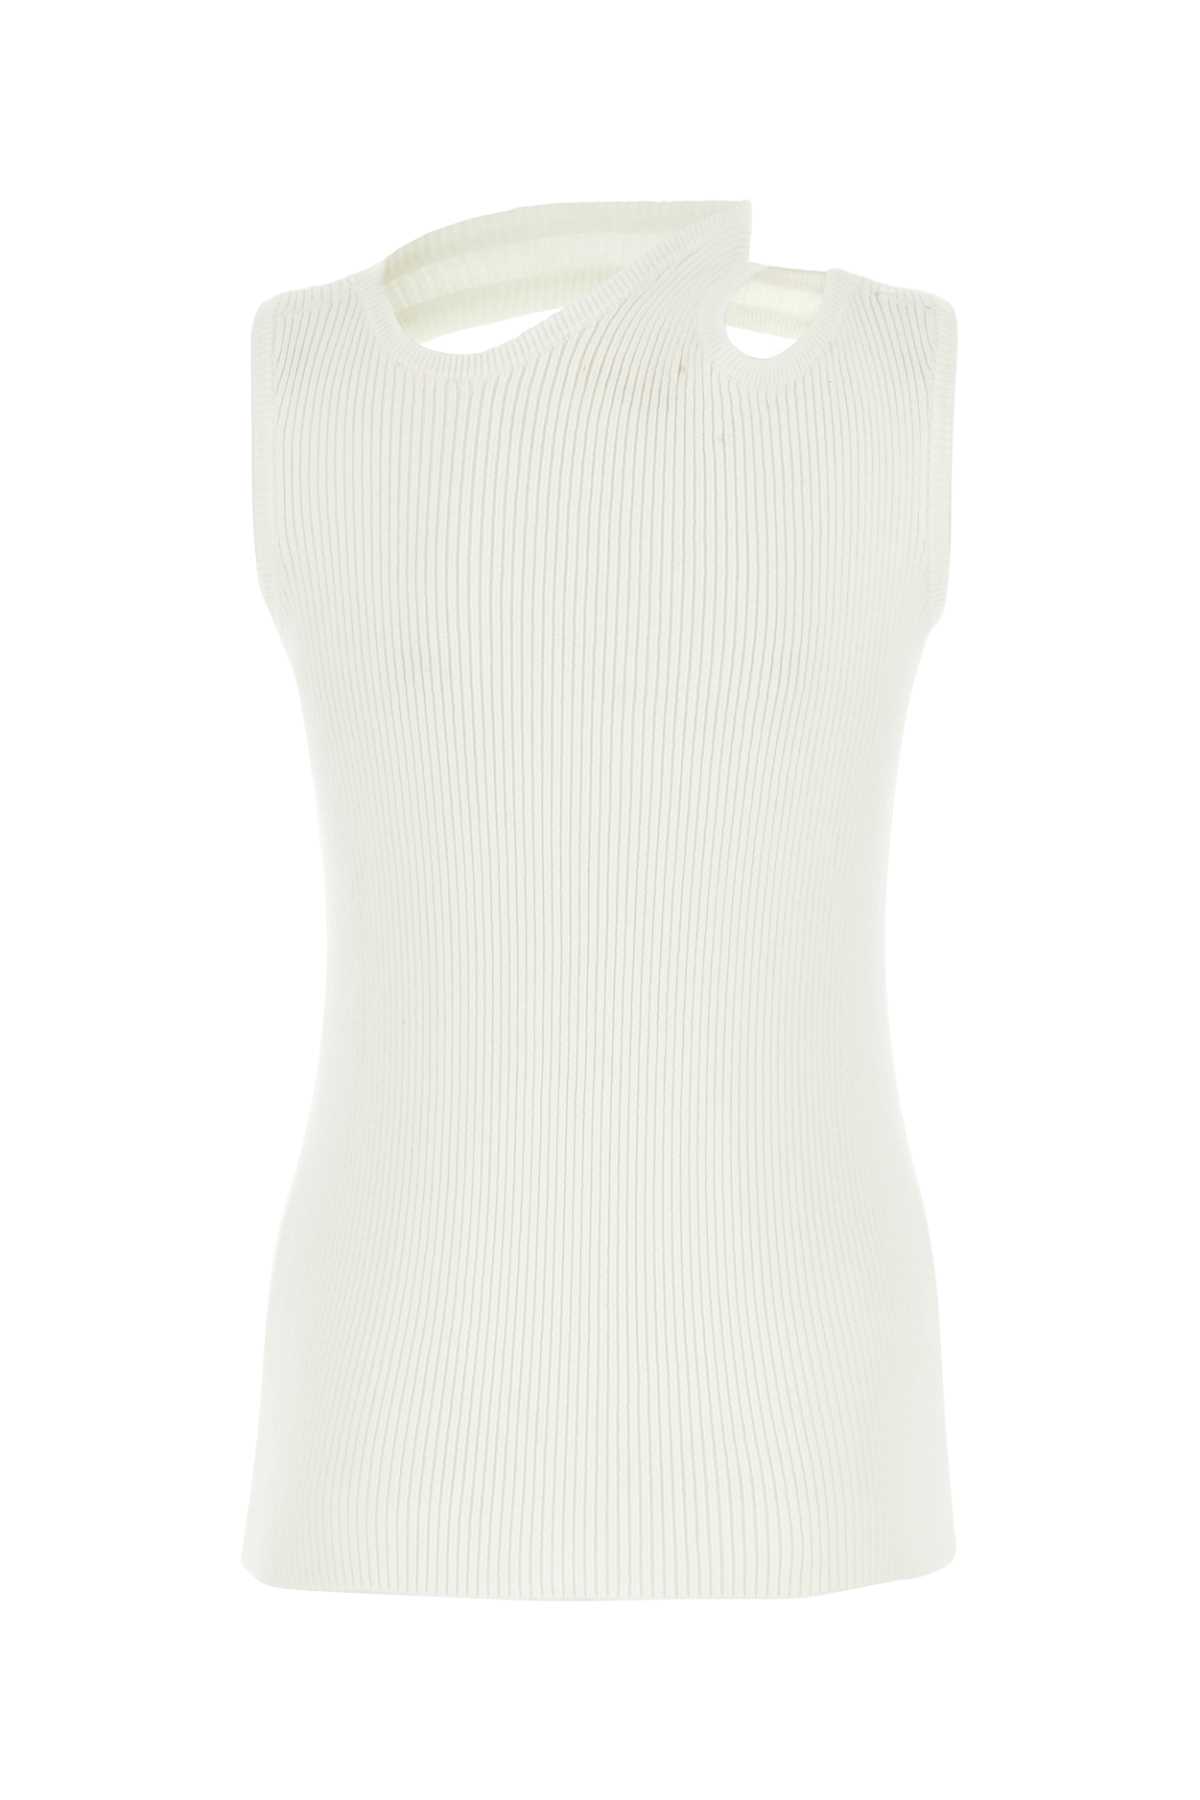 Y/PROJECT WHITE STRETCH COTTON BLEND TOP